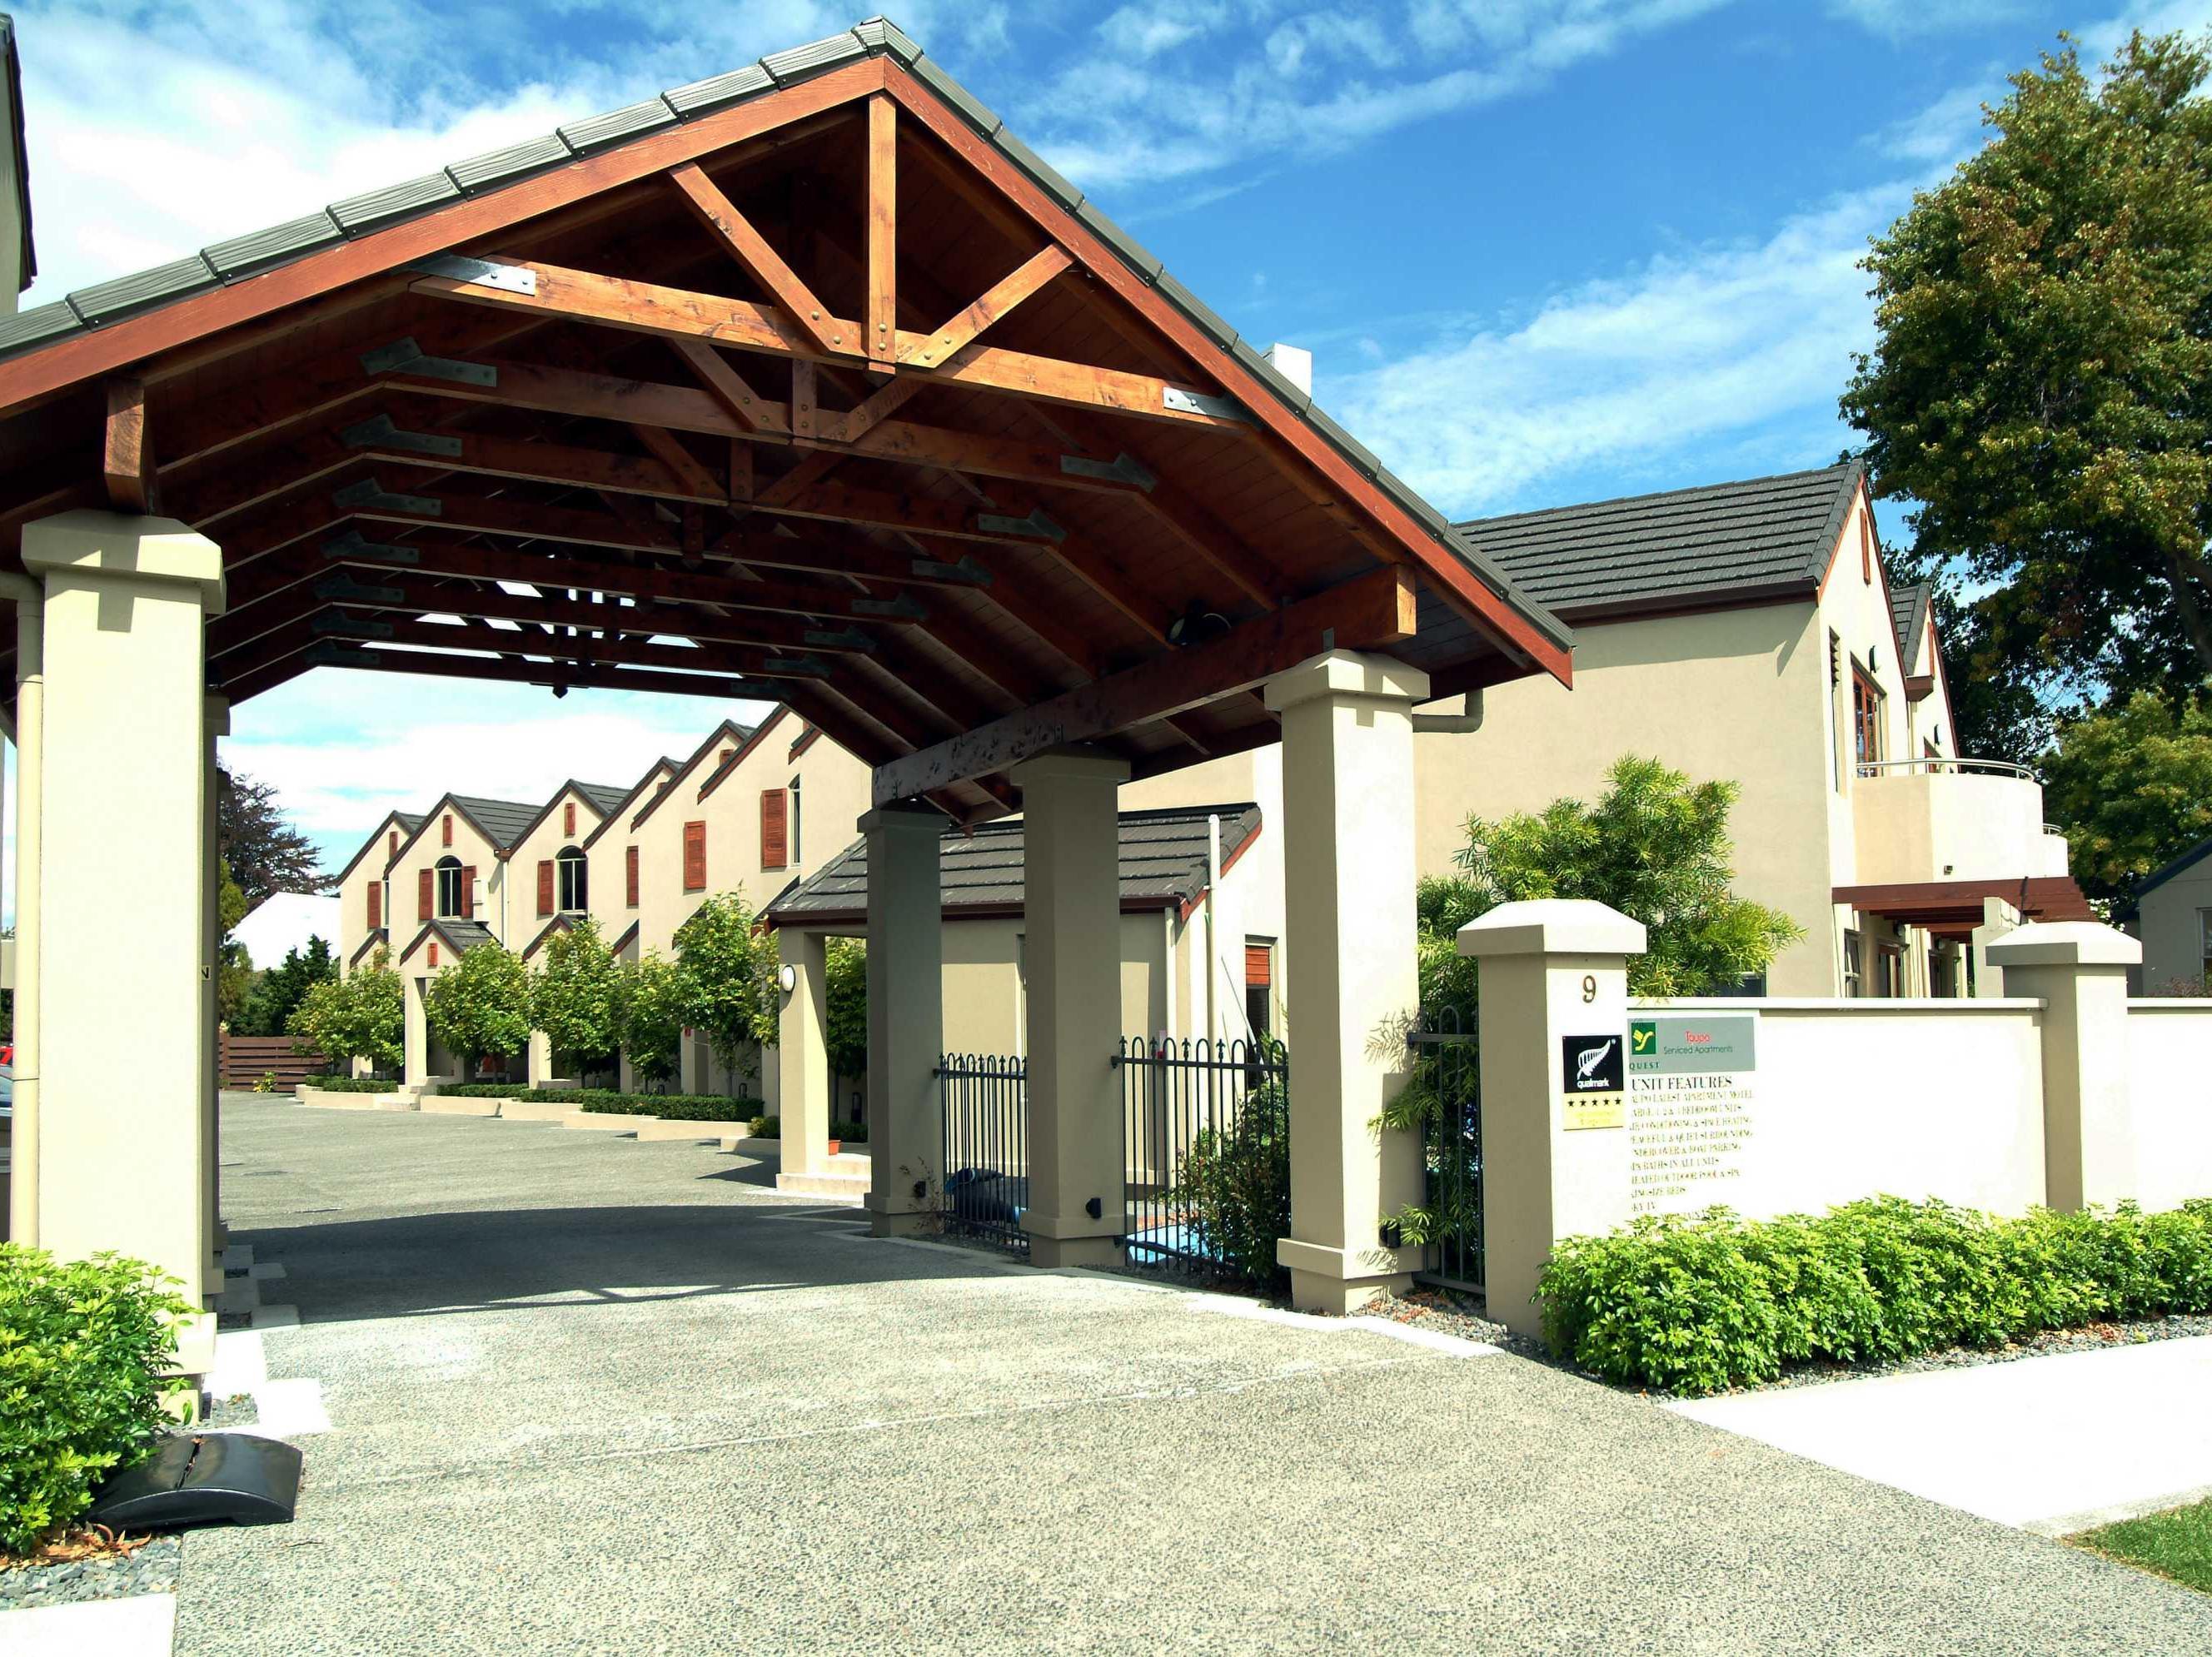 Voyager Apartments Taupo New Zealand FAQ 2016, What facilities are there in Voyager Apartments Taupo New Zealand 2016, What Languages Spoken are Supported in Voyager Apartments Taupo New Zealand 2016, Which payment cards are accepted in Voyager Apartments Taupo New Zealand , New Zealand Voyager Apartments Taupo room facilities and services Q&A 2016, New Zealand Voyager Apartments Taupo online booking services 2016, New Zealand Voyager Apartments Taupo address 2016, New Zealand Voyager Apartments Taupo telephone number 2016,New Zealand Voyager Apartments Taupo map 2016, New Zealand Voyager Apartments Taupo traffic guide 2016, how to go New Zealand Voyager Apartments Taupo, New Zealand Voyager Apartments Taupo booking online 2016, New Zealand Voyager Apartments Taupo room types 2016.